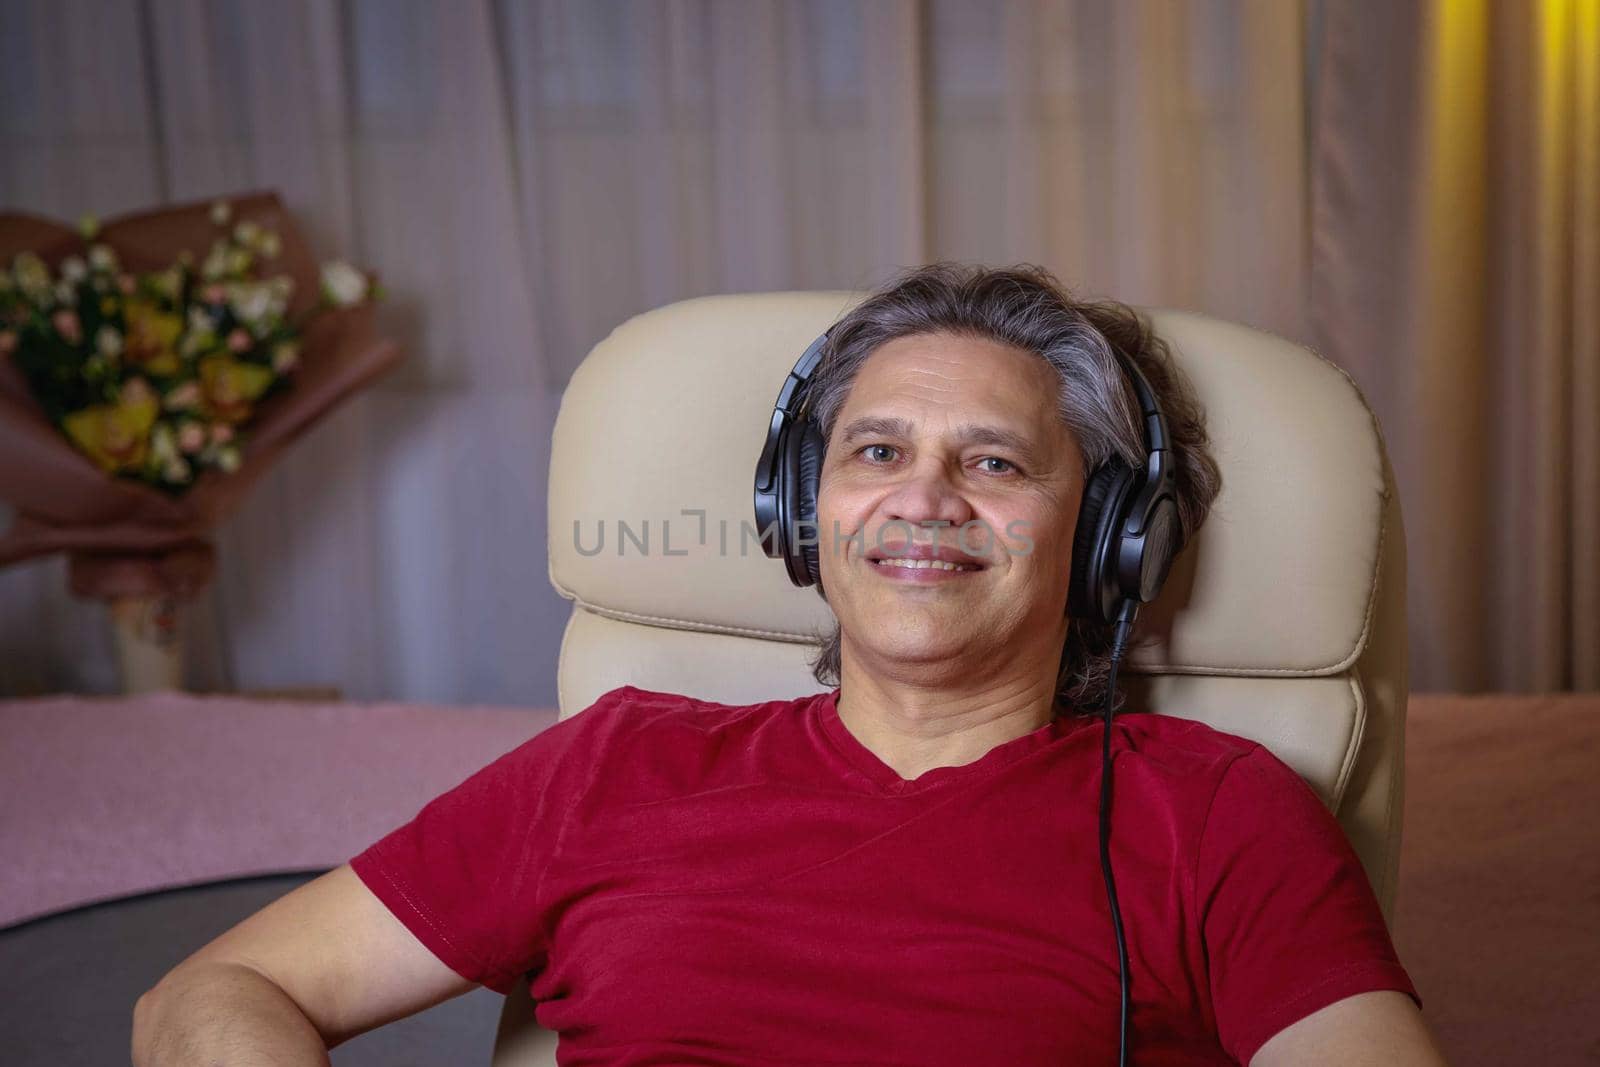 50-year-old man listens to music on headphones at home, sitting in a chair. Relaxing delight.